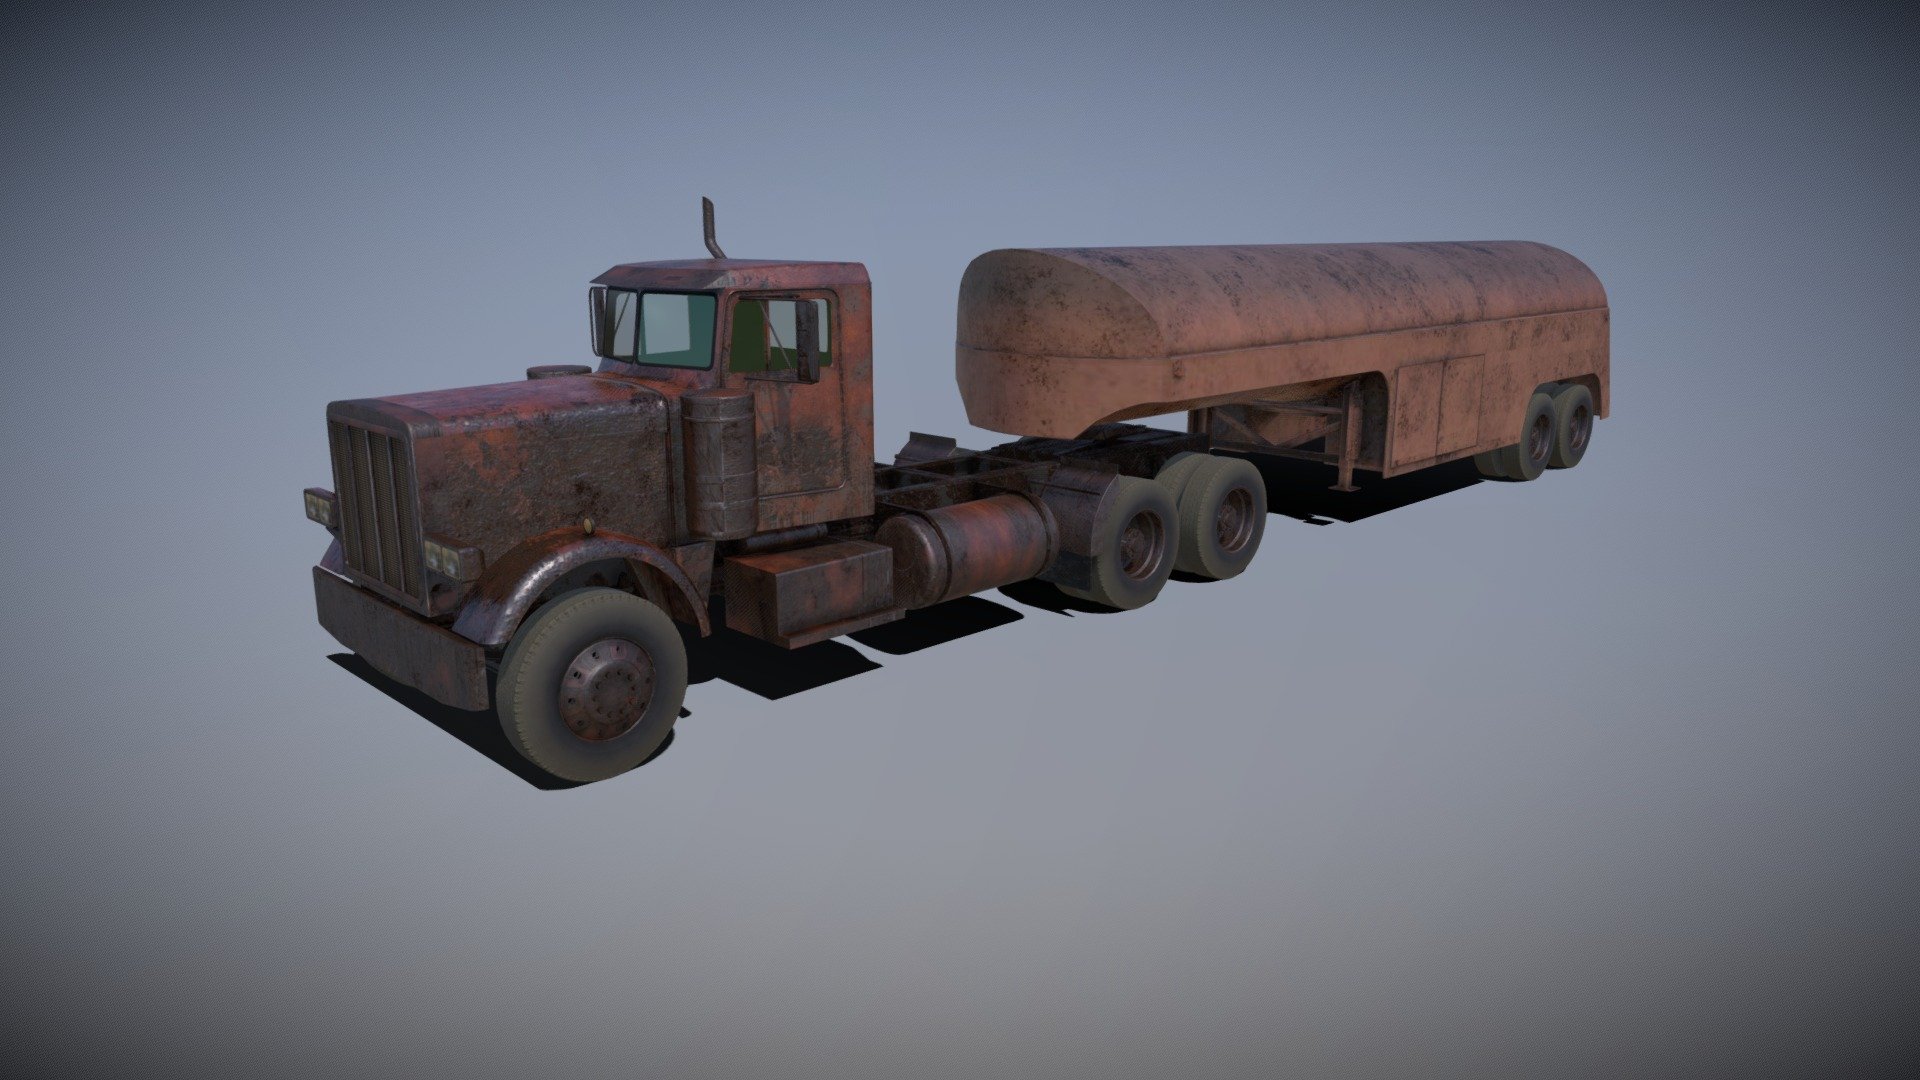 Old rusty american tanker truck inspired by the truck in the Duel movie - Old Tanker Semi Truck - 3D model by Cristineltr 3d model